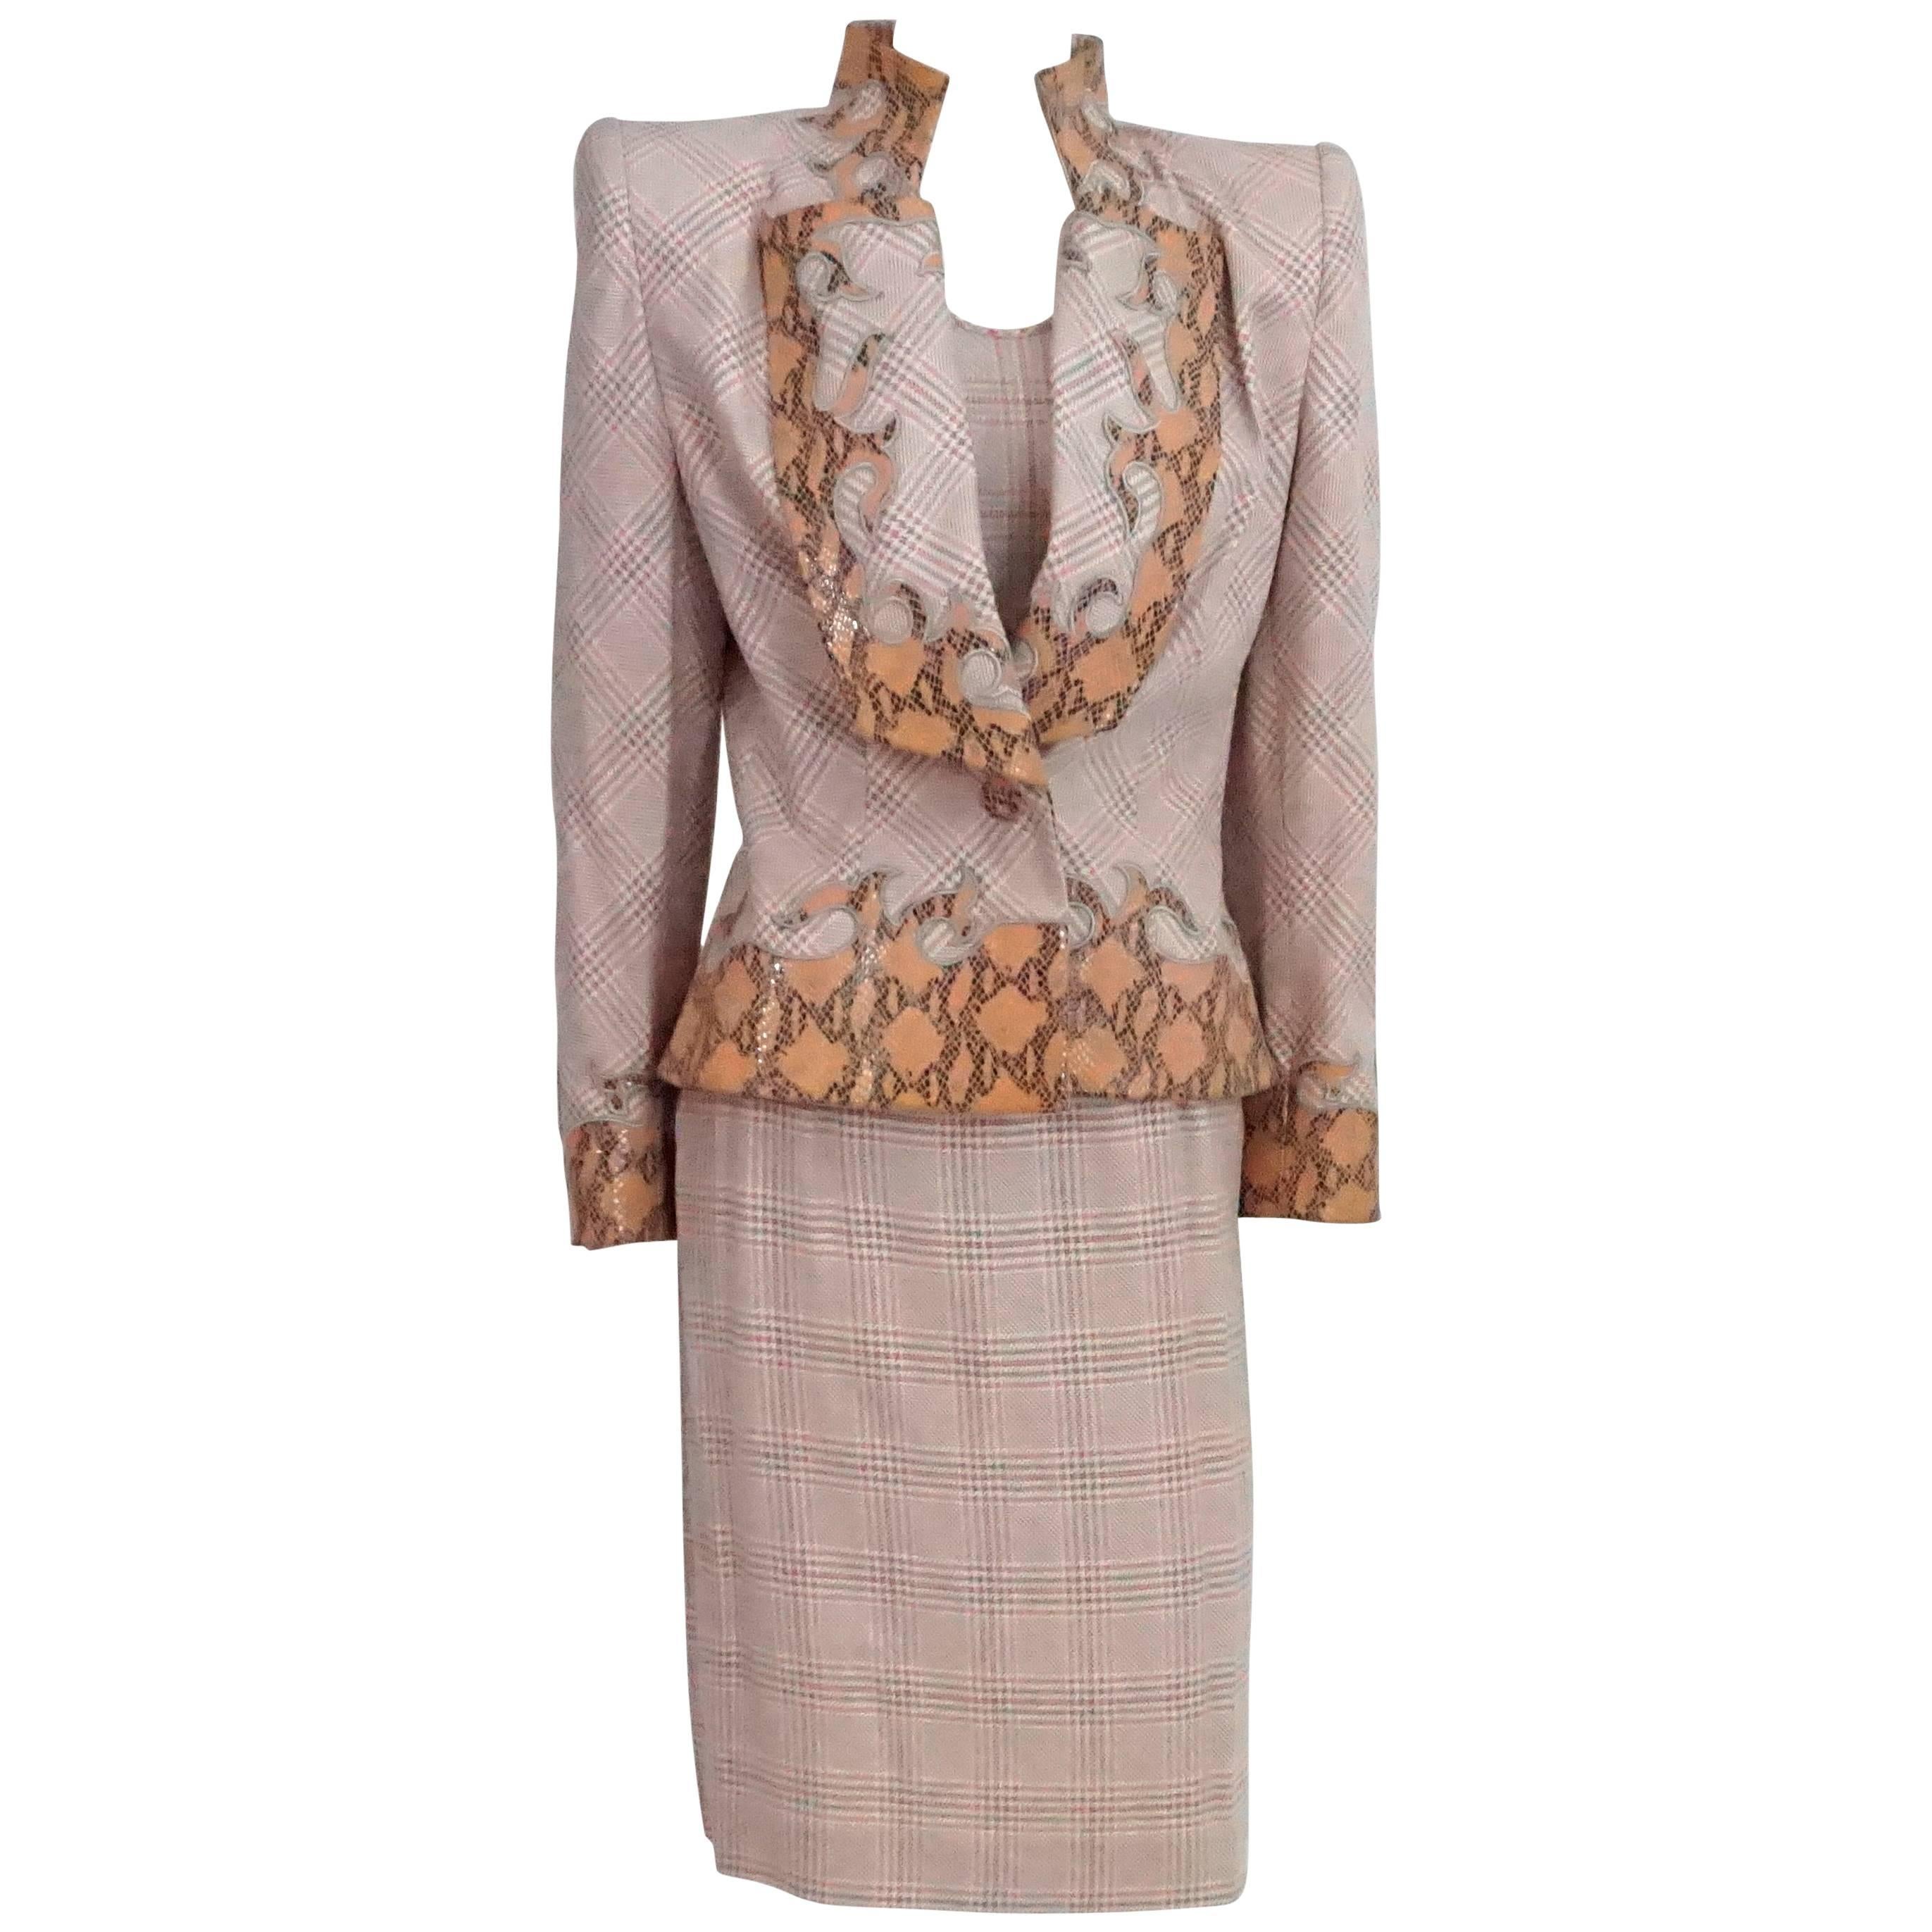 Givenchy Couture Pink Houndstooth Skirt Suit and Top with Snake Detail, 1990s